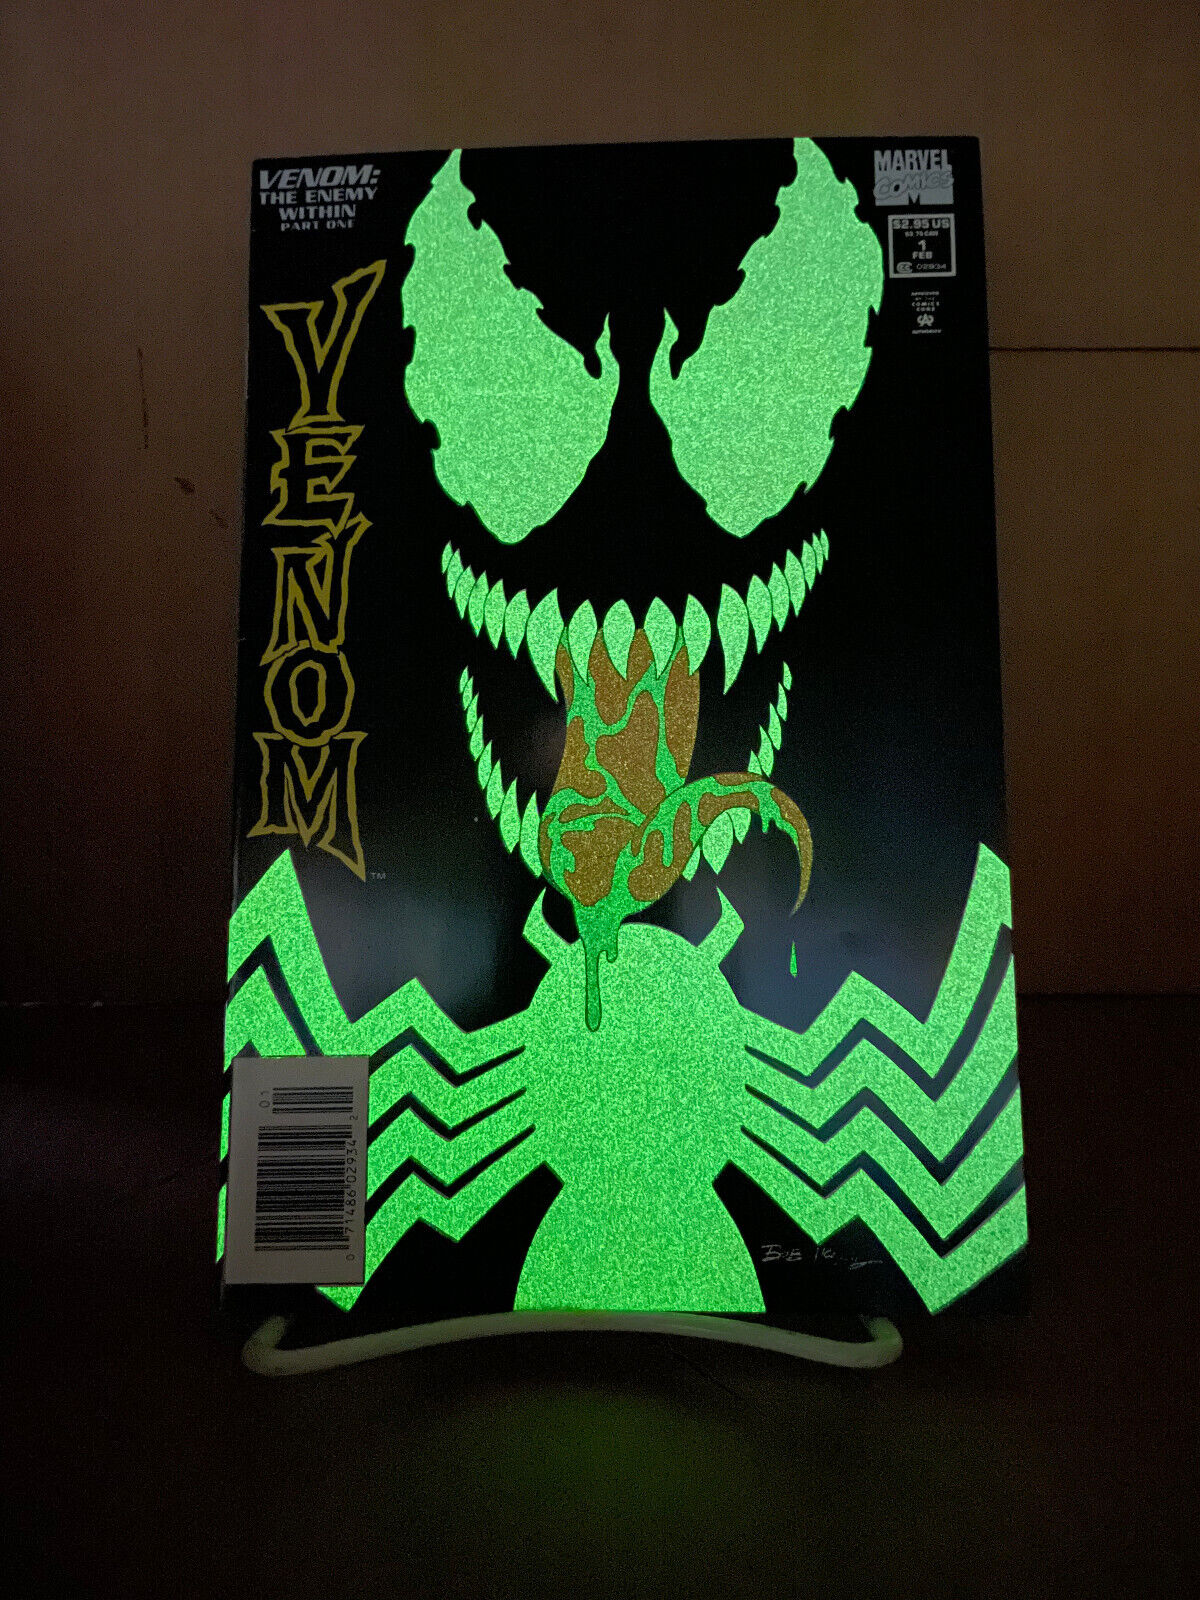 VENOM THE ENEMY WITHIN #1 (1994) NEWSSTAND GLOW IN THE DARK MARVEL COMICS A6